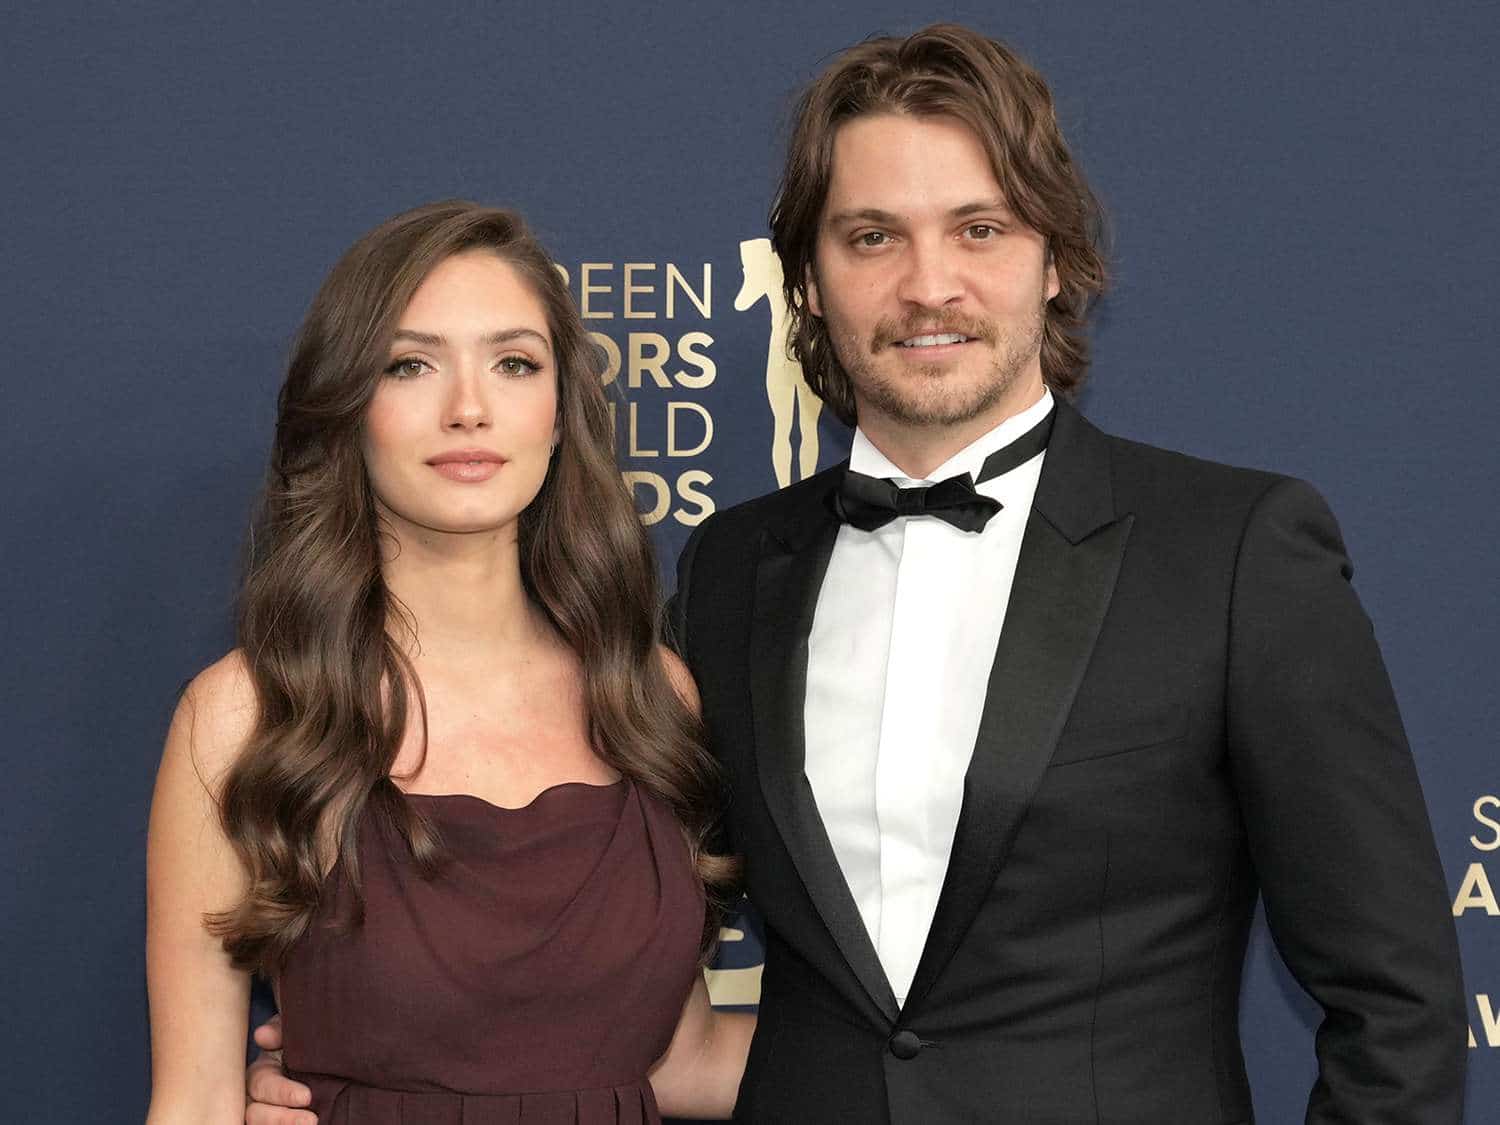 Image of Luke Grimes and his wife, Bianca Rodrigues